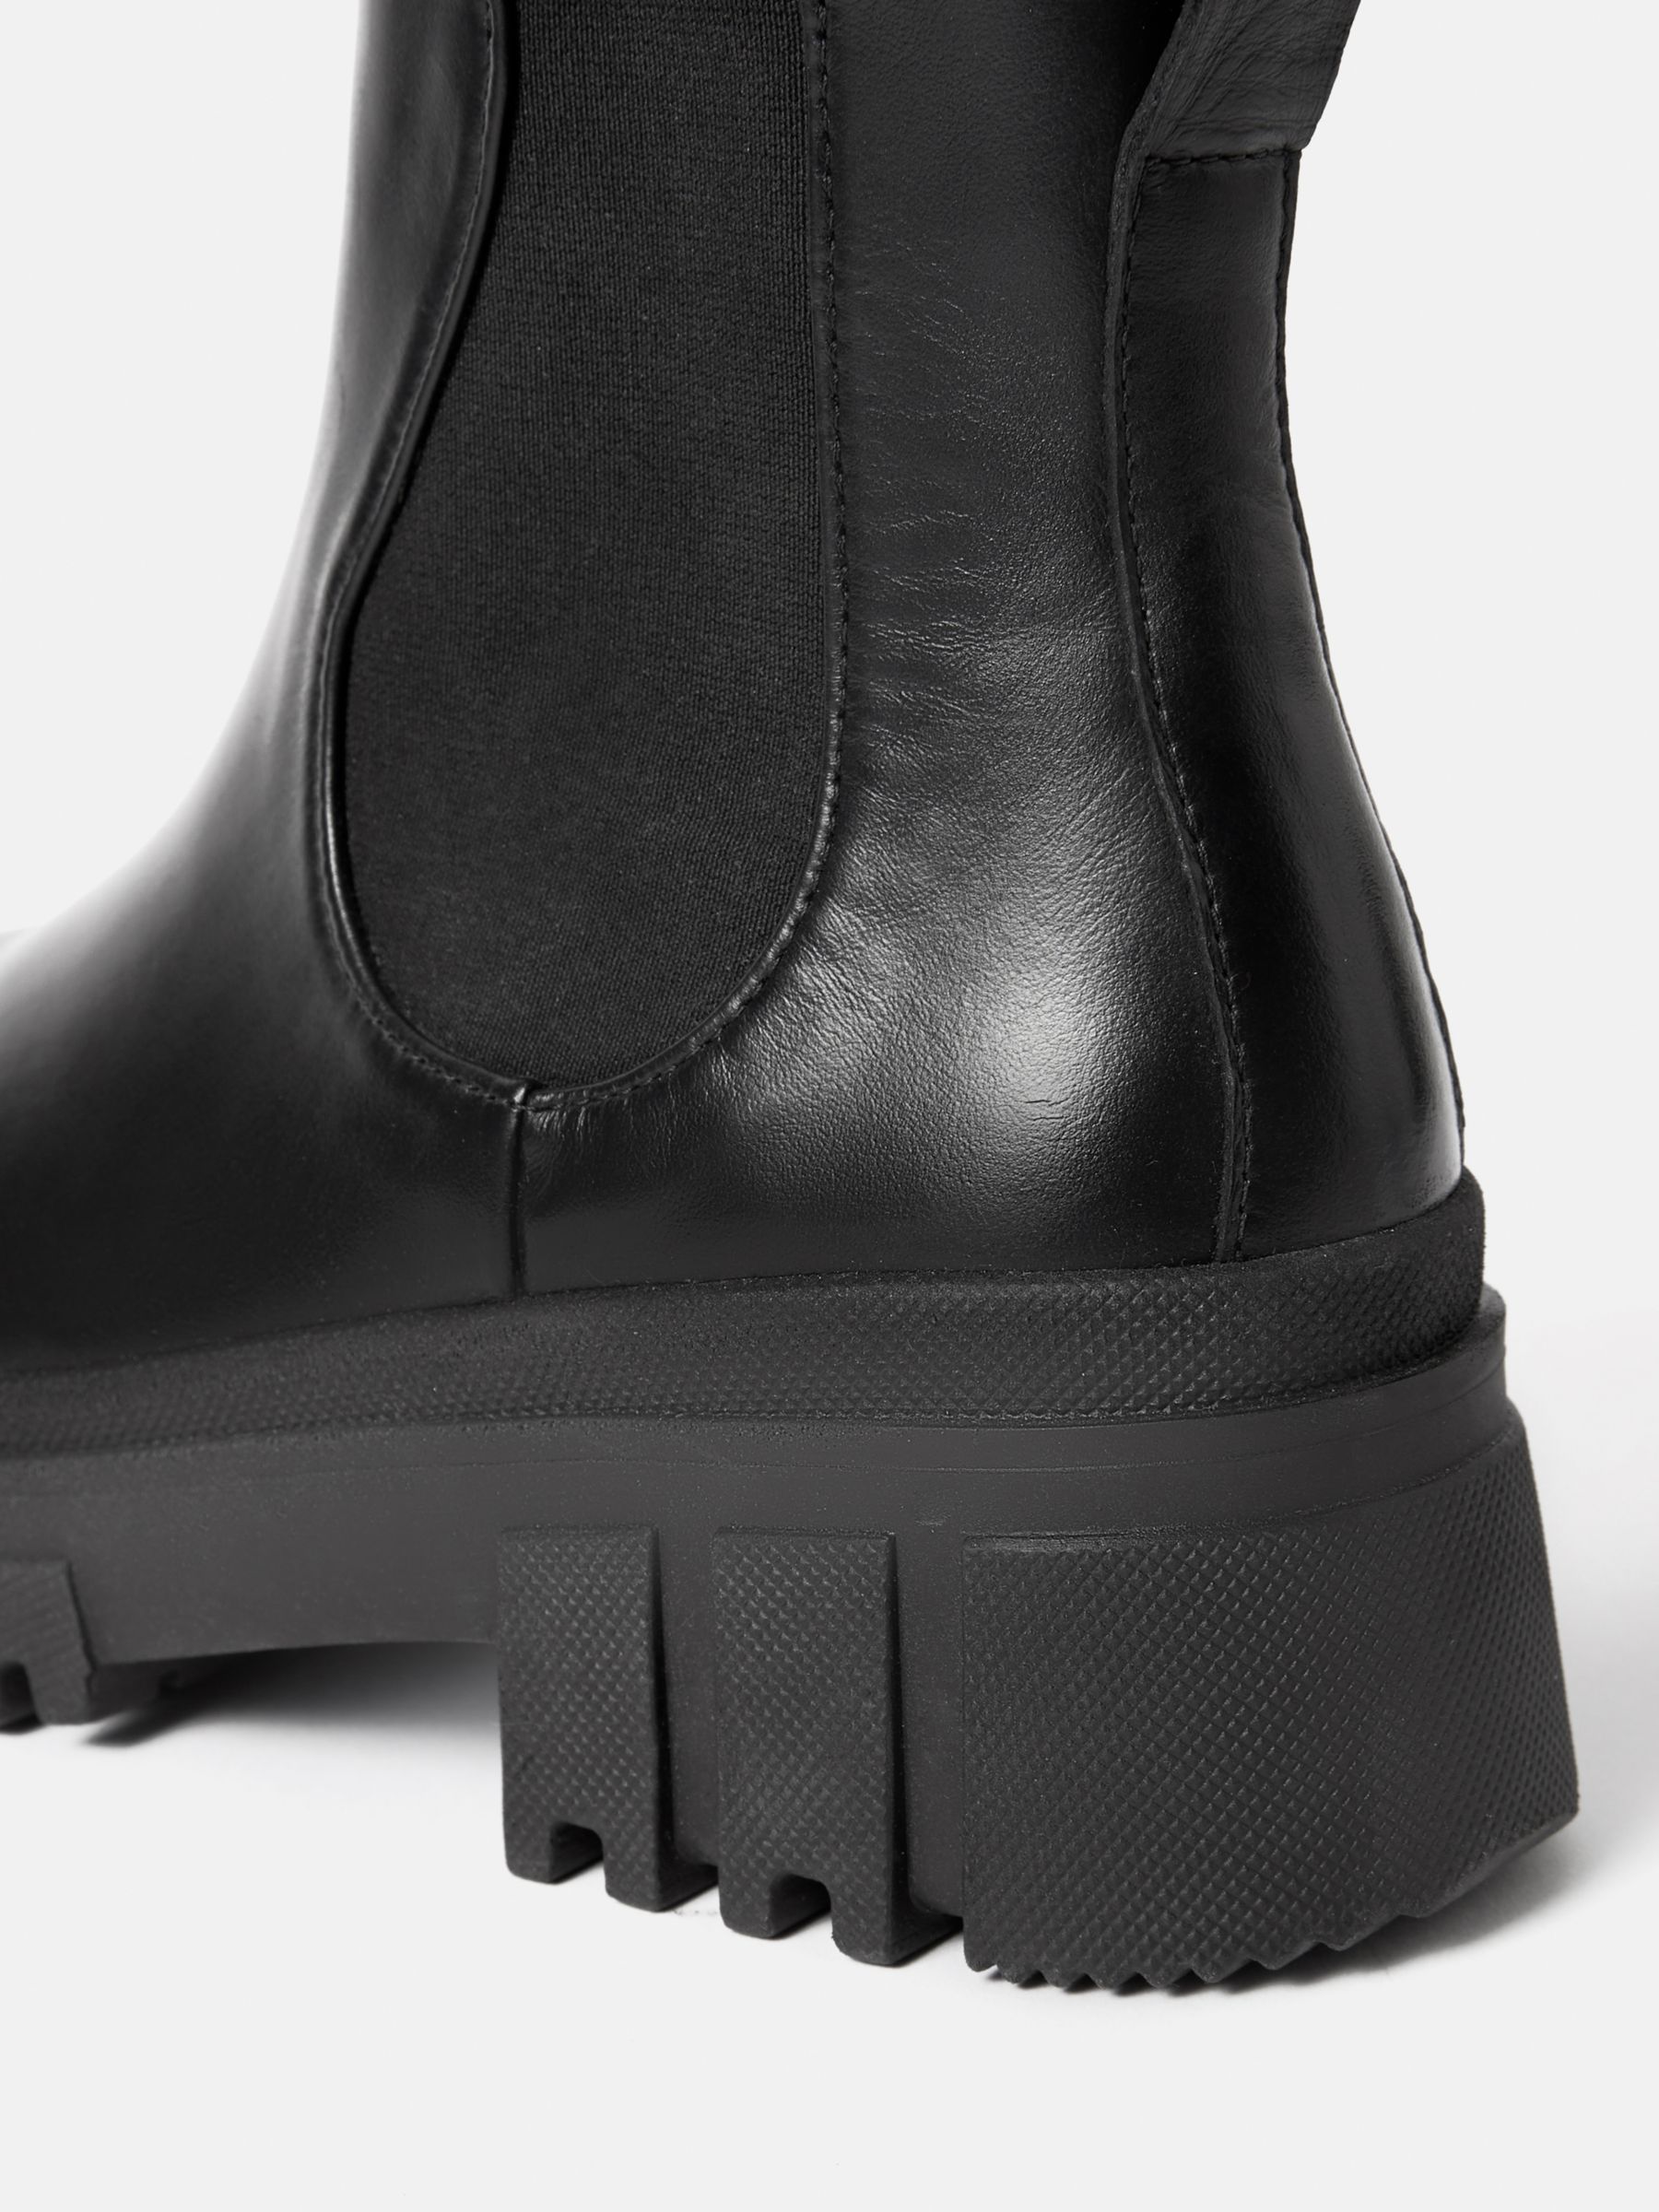 Jigsaw Yvie Gum Sole Leather Boots at John Lewis & Partners